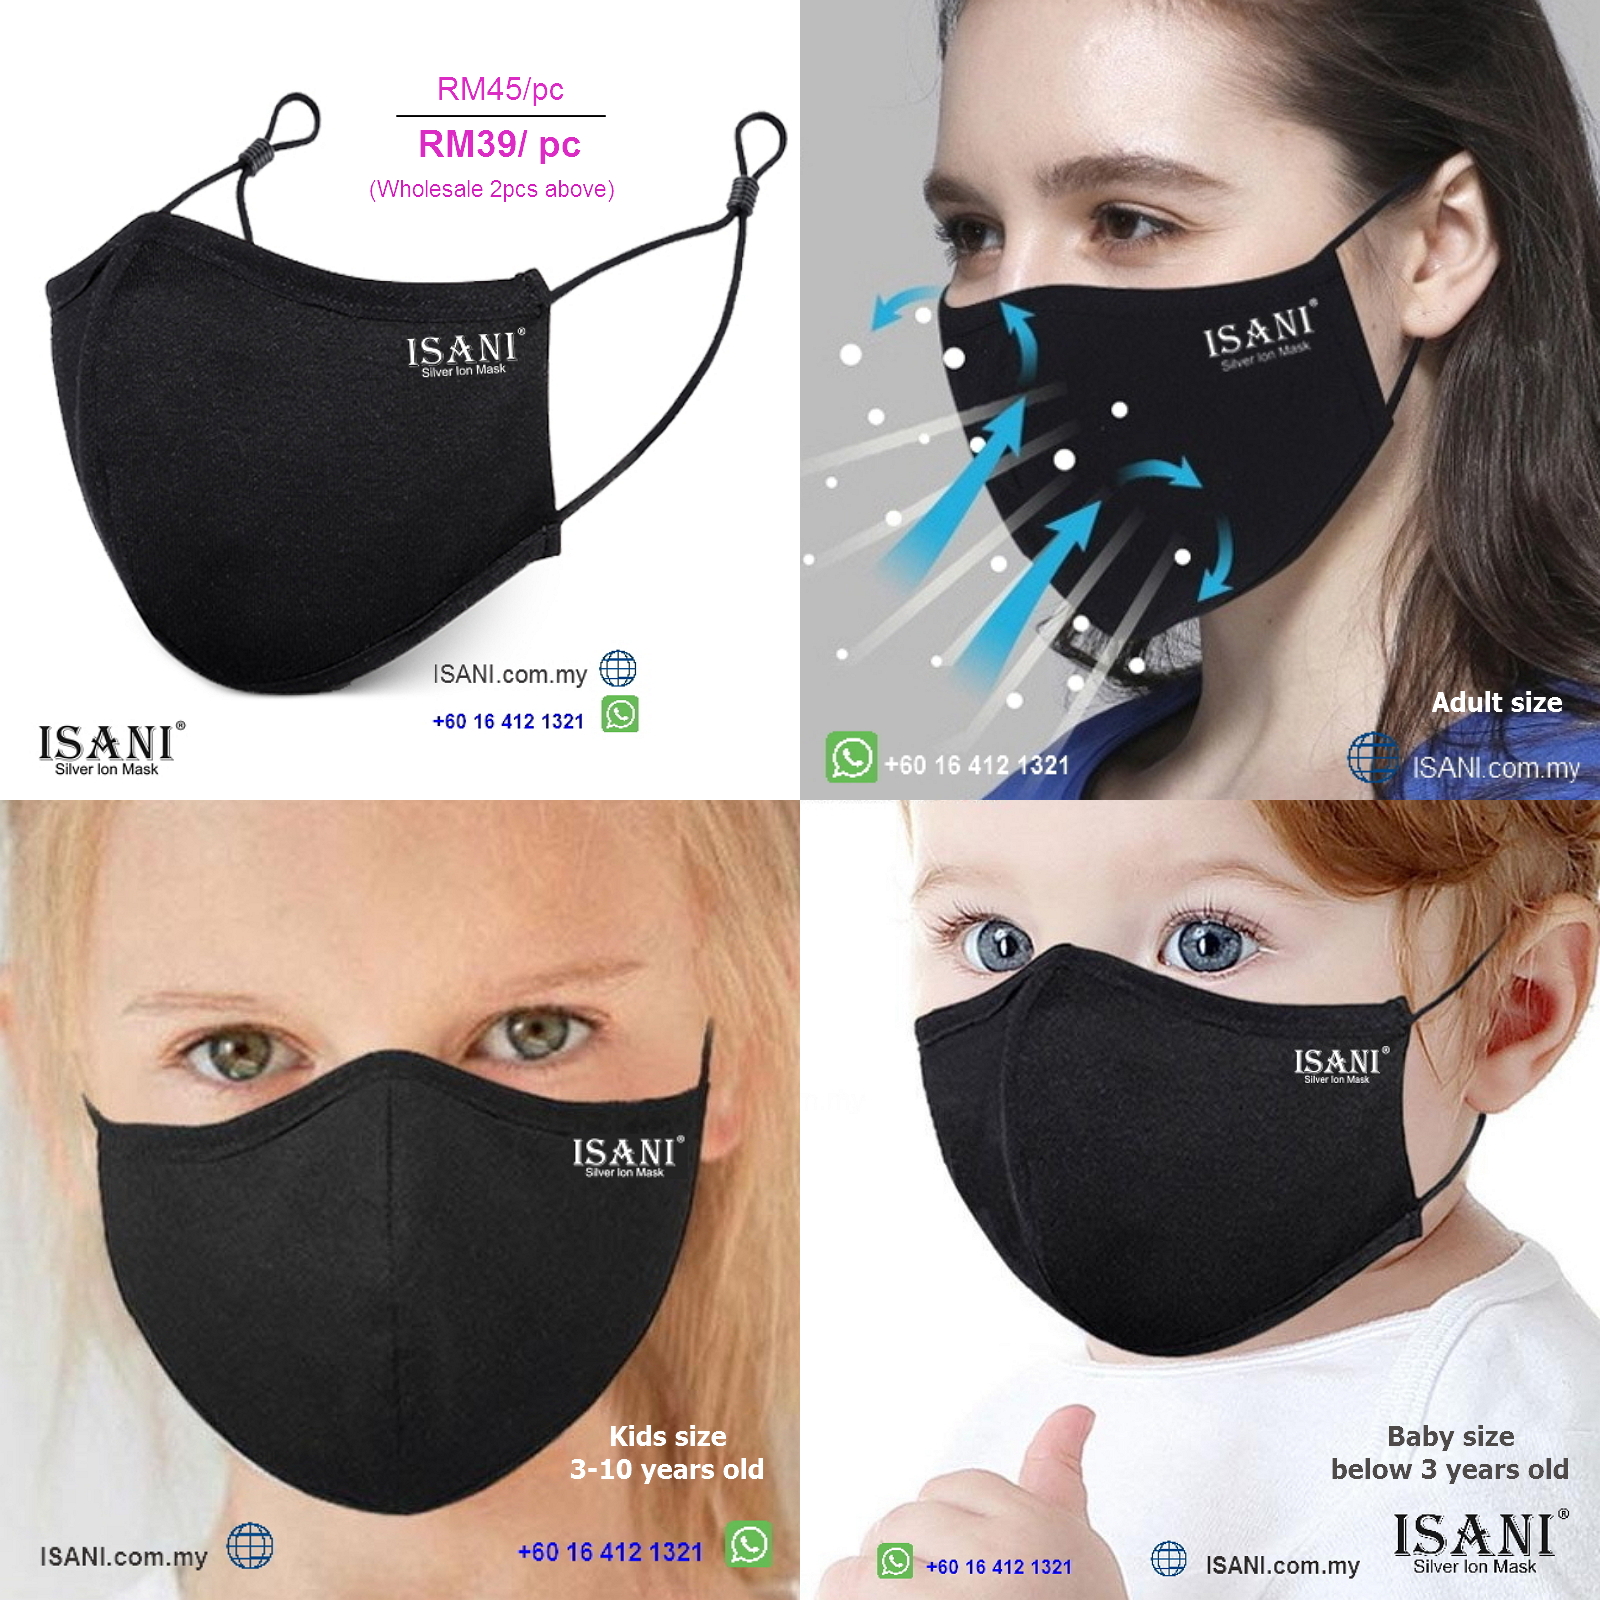 ISANI Mask all in one size